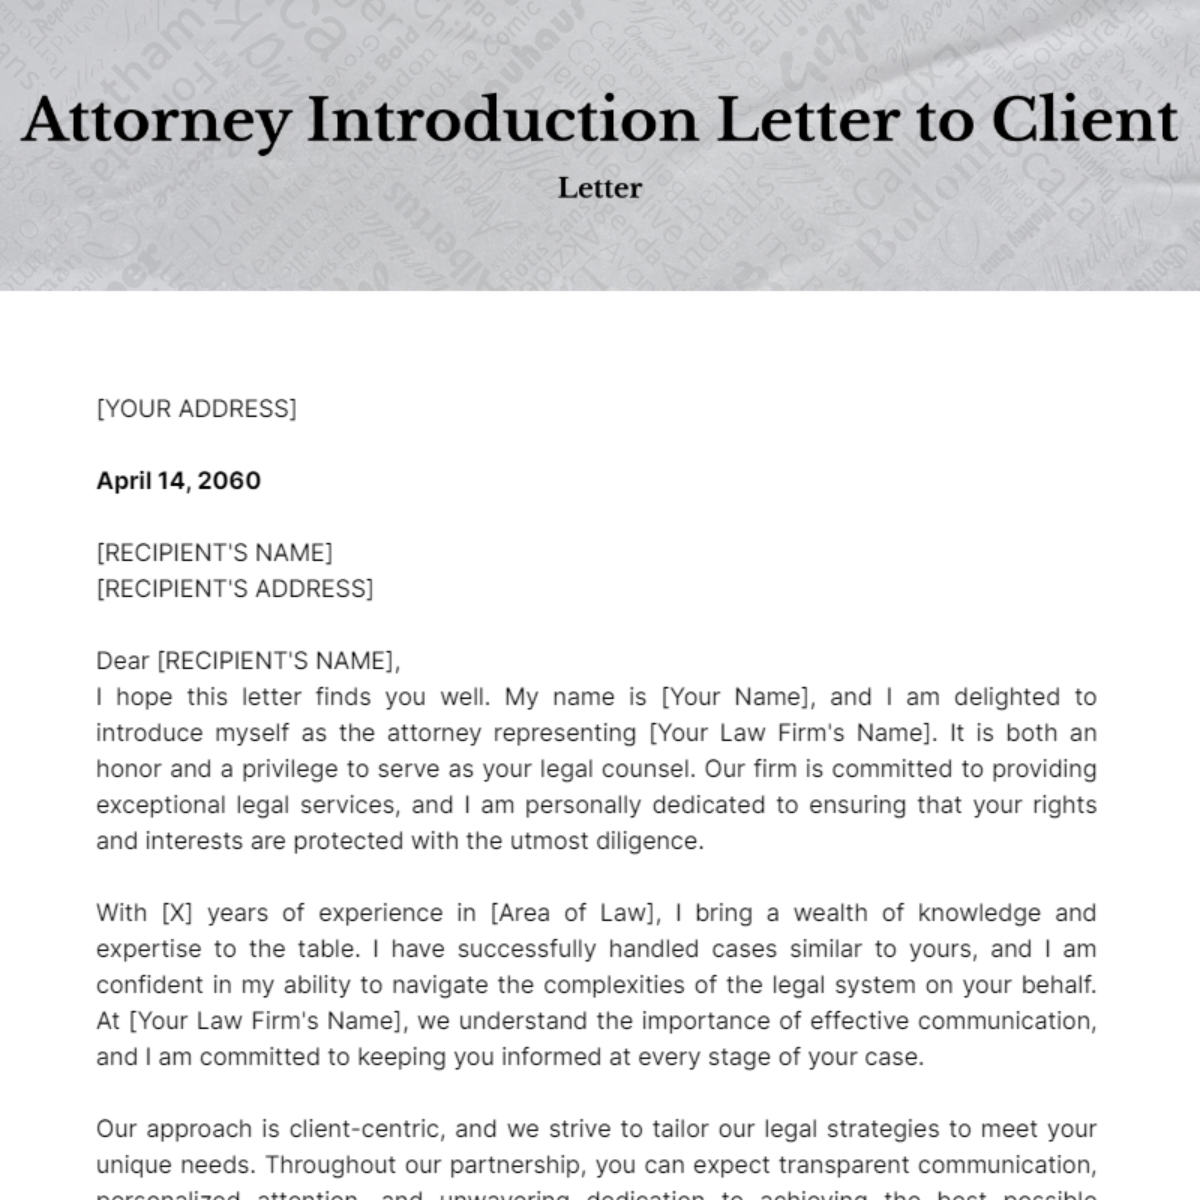 Attorney Introduction Letter to Client Template